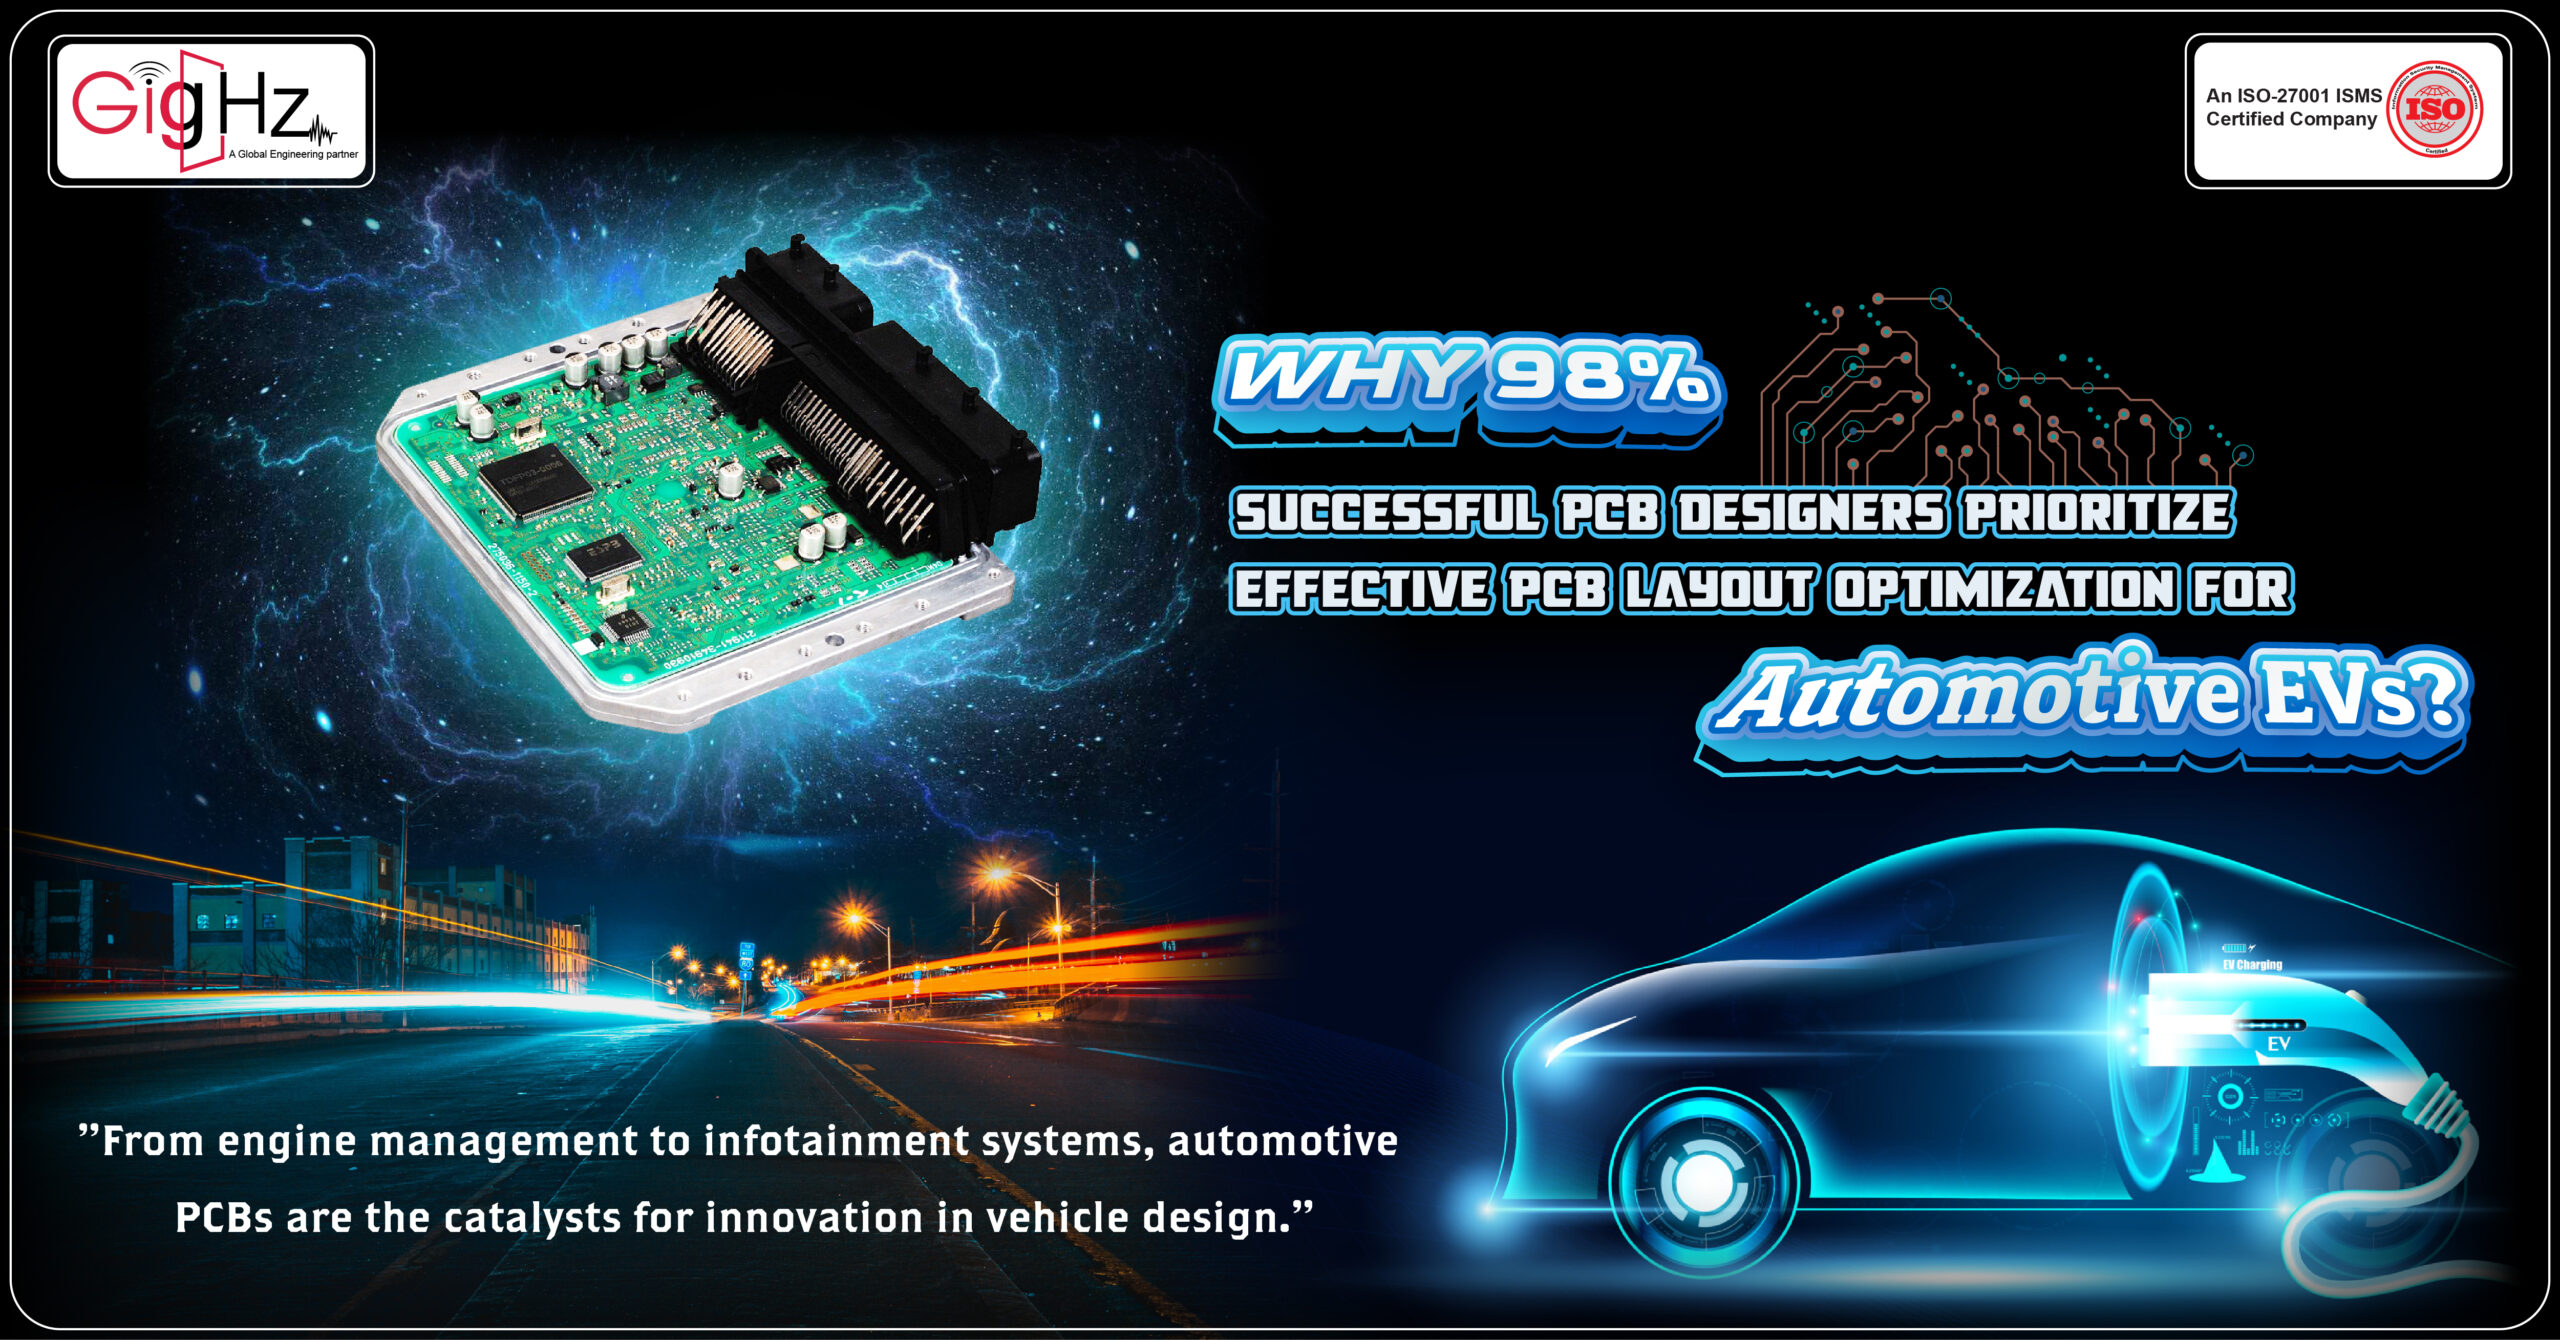 Why 98% of successful pcb designers prioritize effective pcb layout optimization for Automotive EVs?